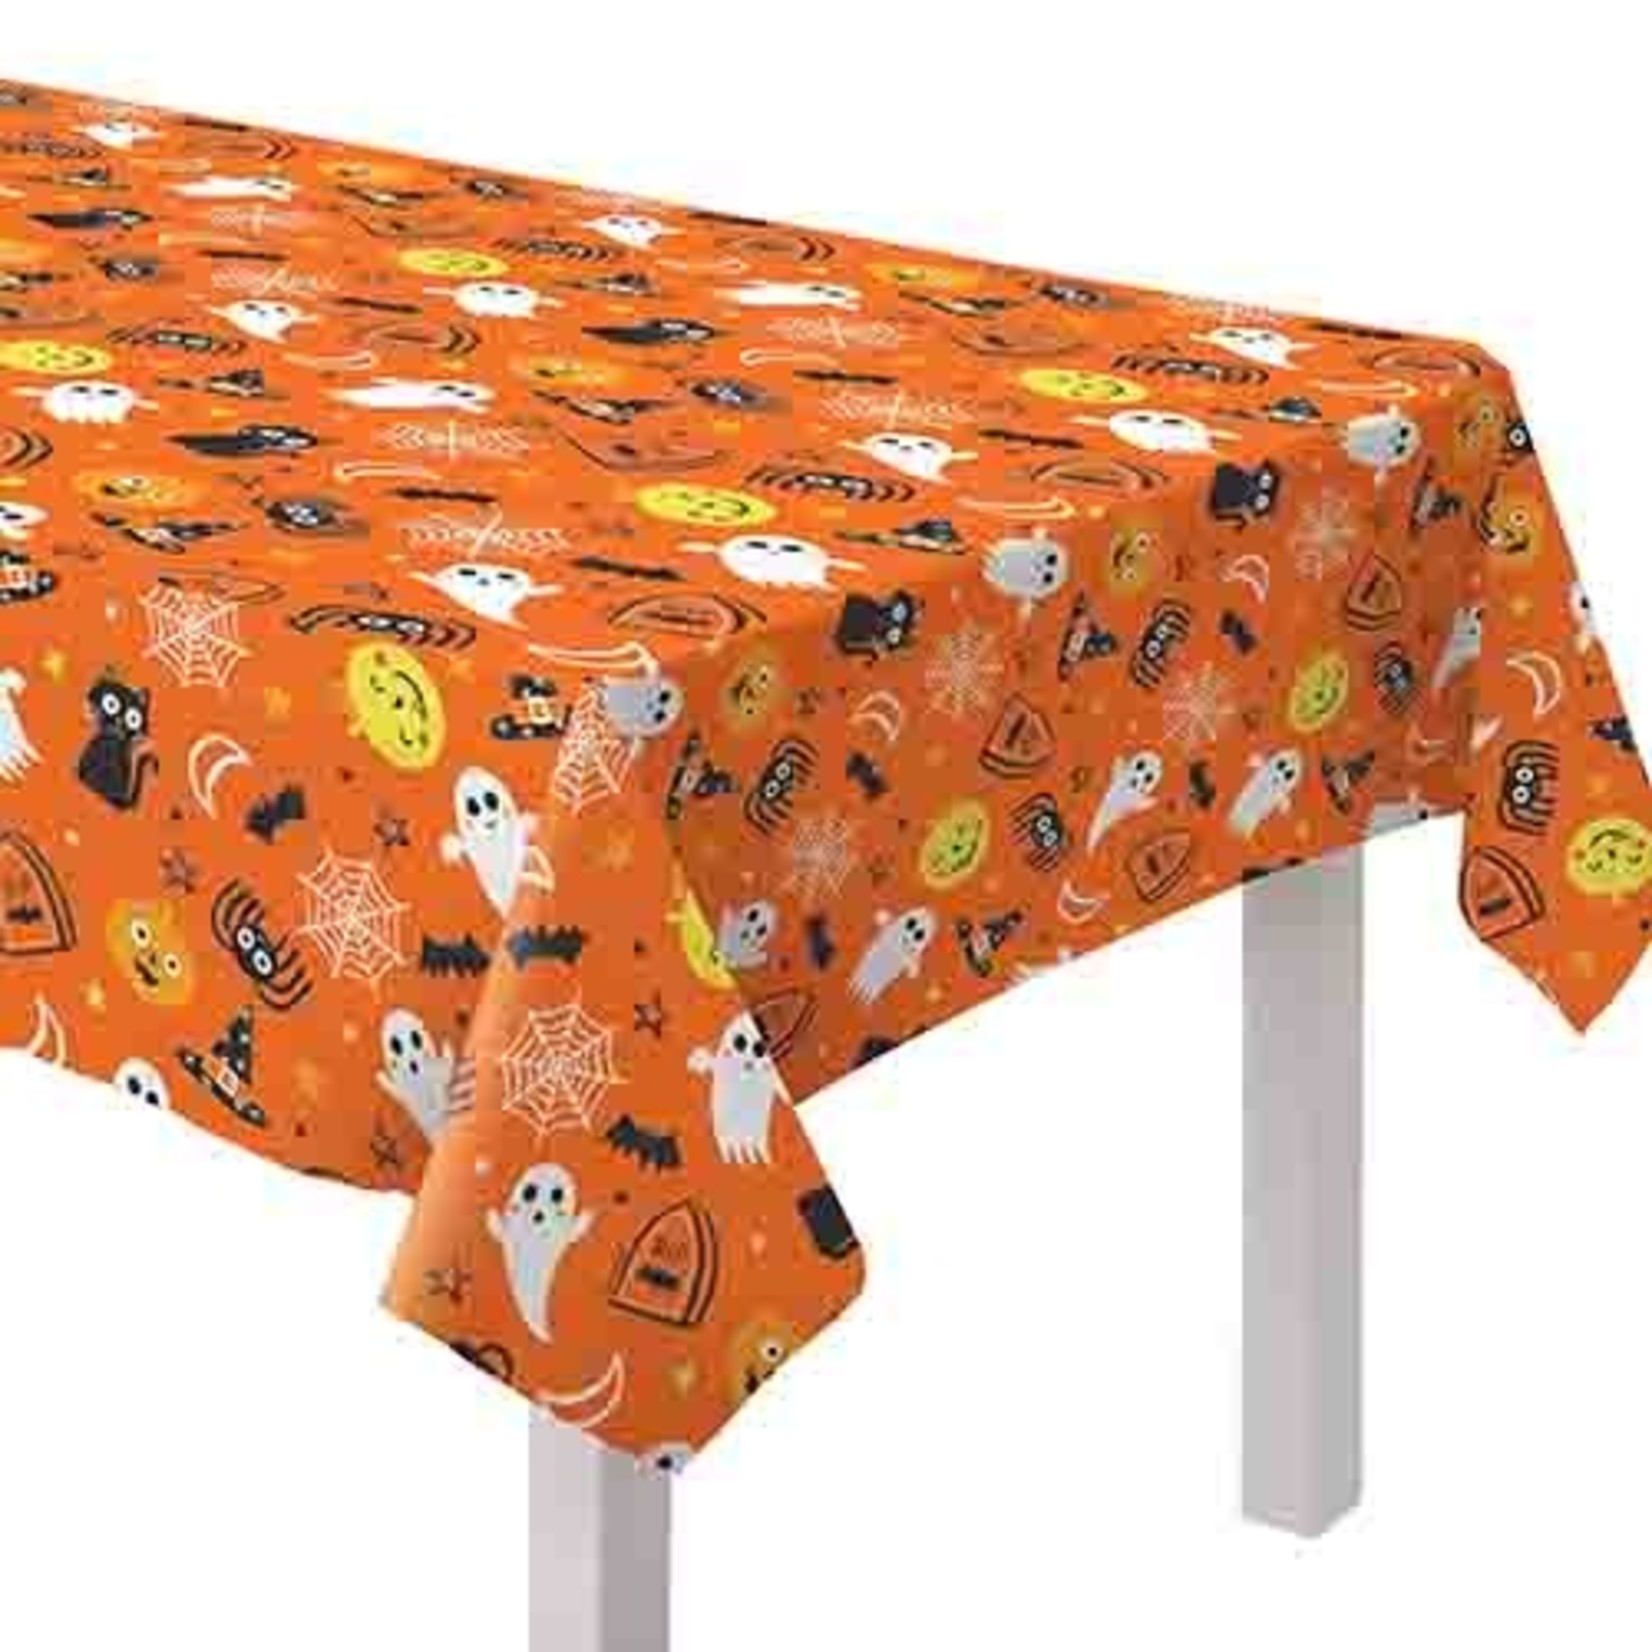 Amscan Spooky Halloween Friends Flannel Backed Table Cover - 52" x 90"